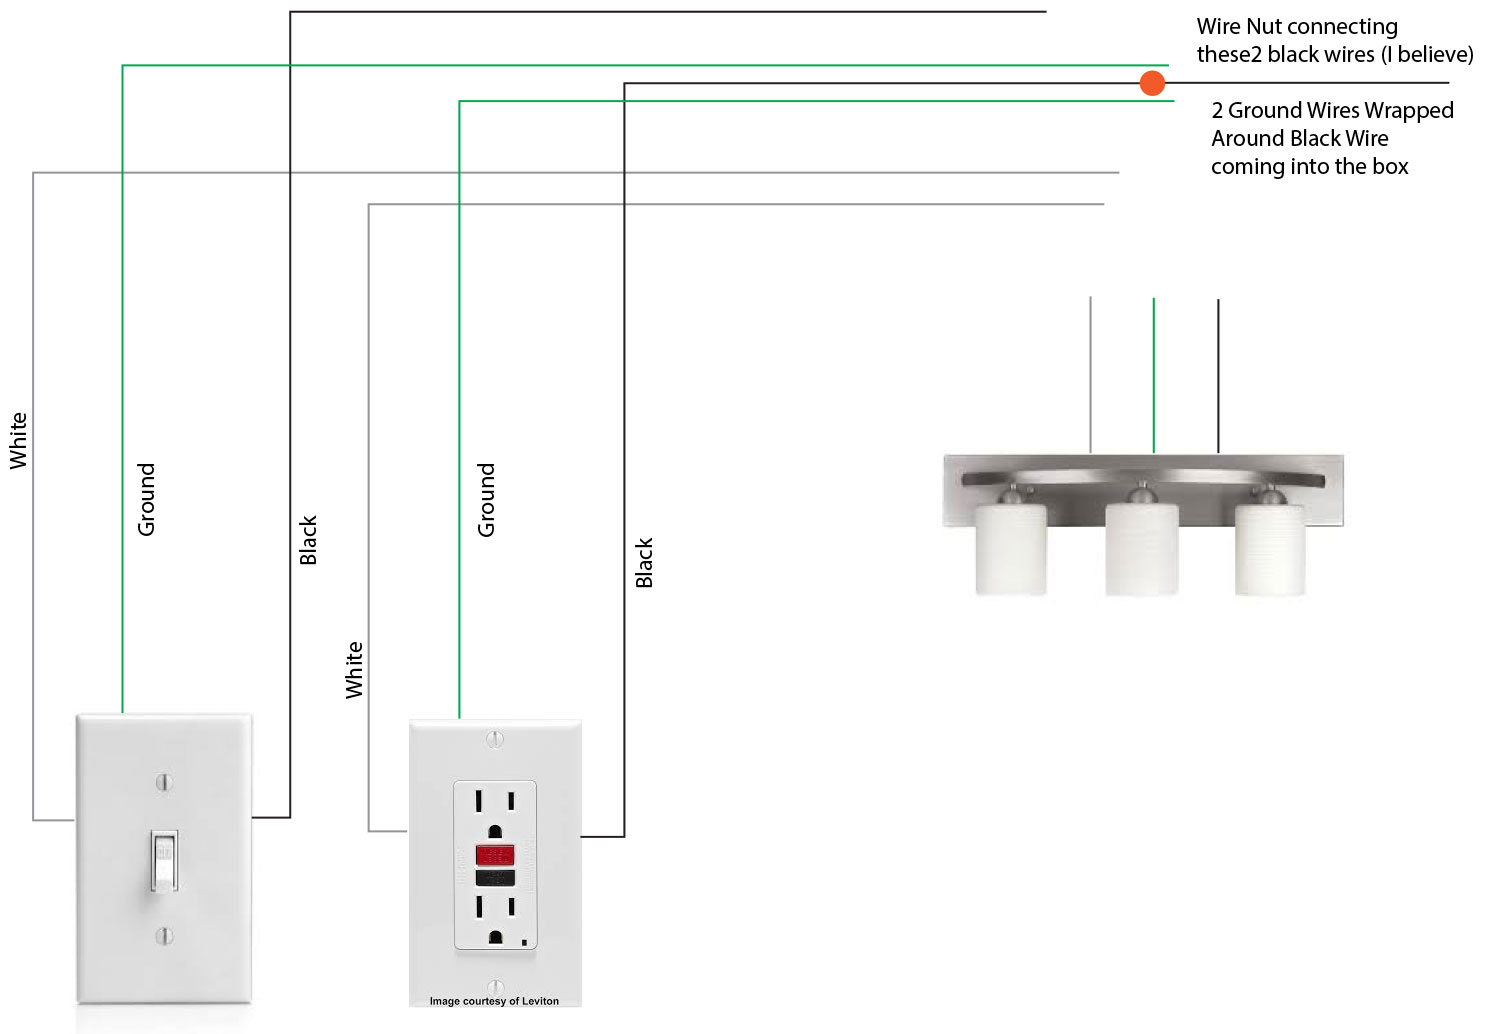 Lighting - Wiring A Light Fixture In Bathroom Attached To A Switch - Wiring A Gfci Outlet With A Light Switch Diagram